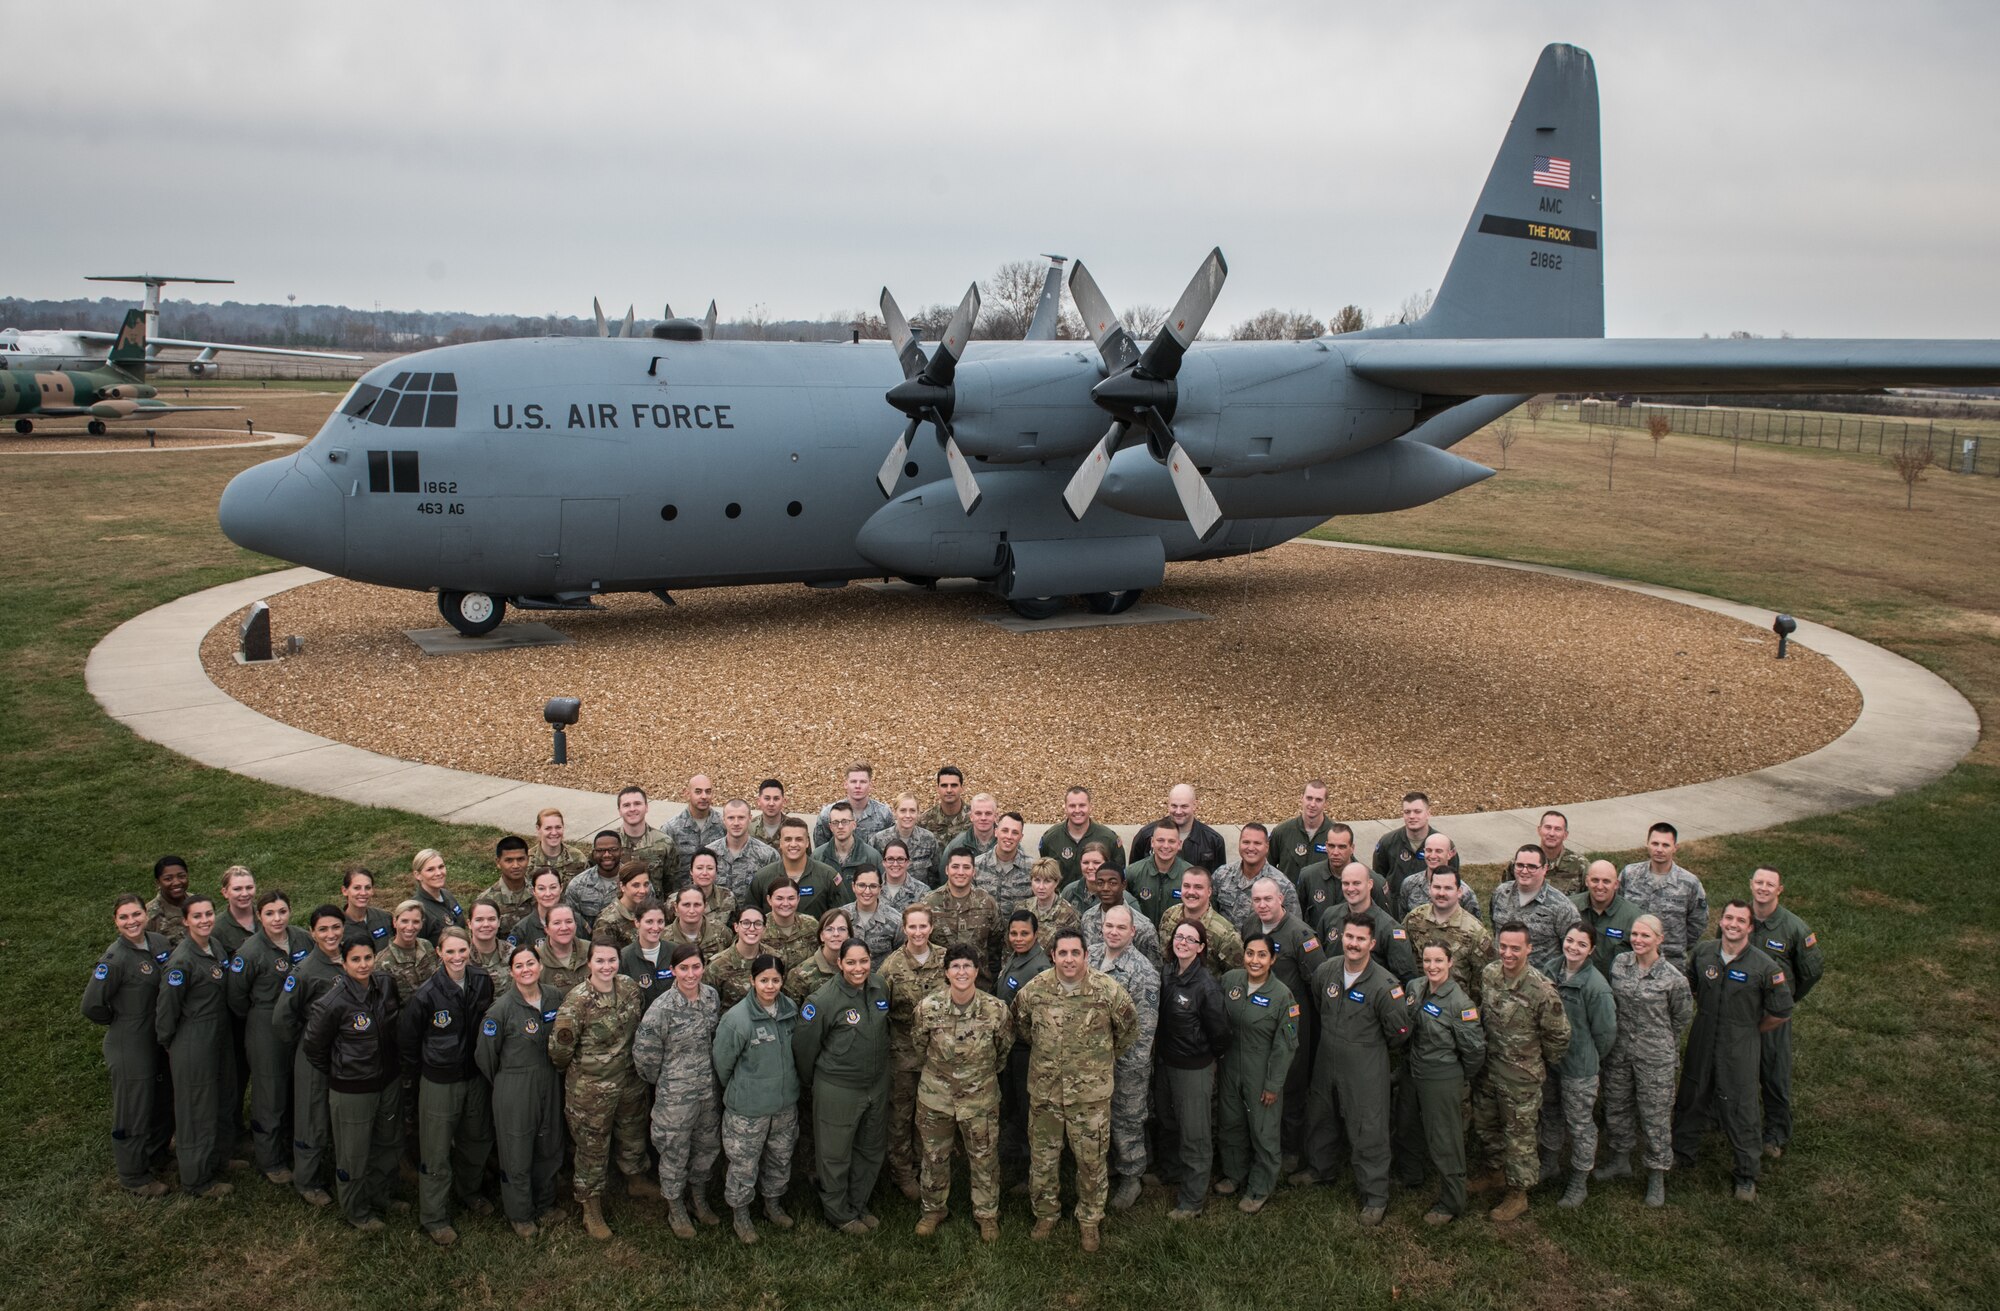 U.S. Air Force Citizen Airmen from the 932nd Aeromedical Evacuation Squadron pose for a group photo Nov. 17, 2019 at the Scott Heritage Air Park, just outside Scott Air Force Base, Illinois. (U.S. Air Force photo by Christopher Parr)